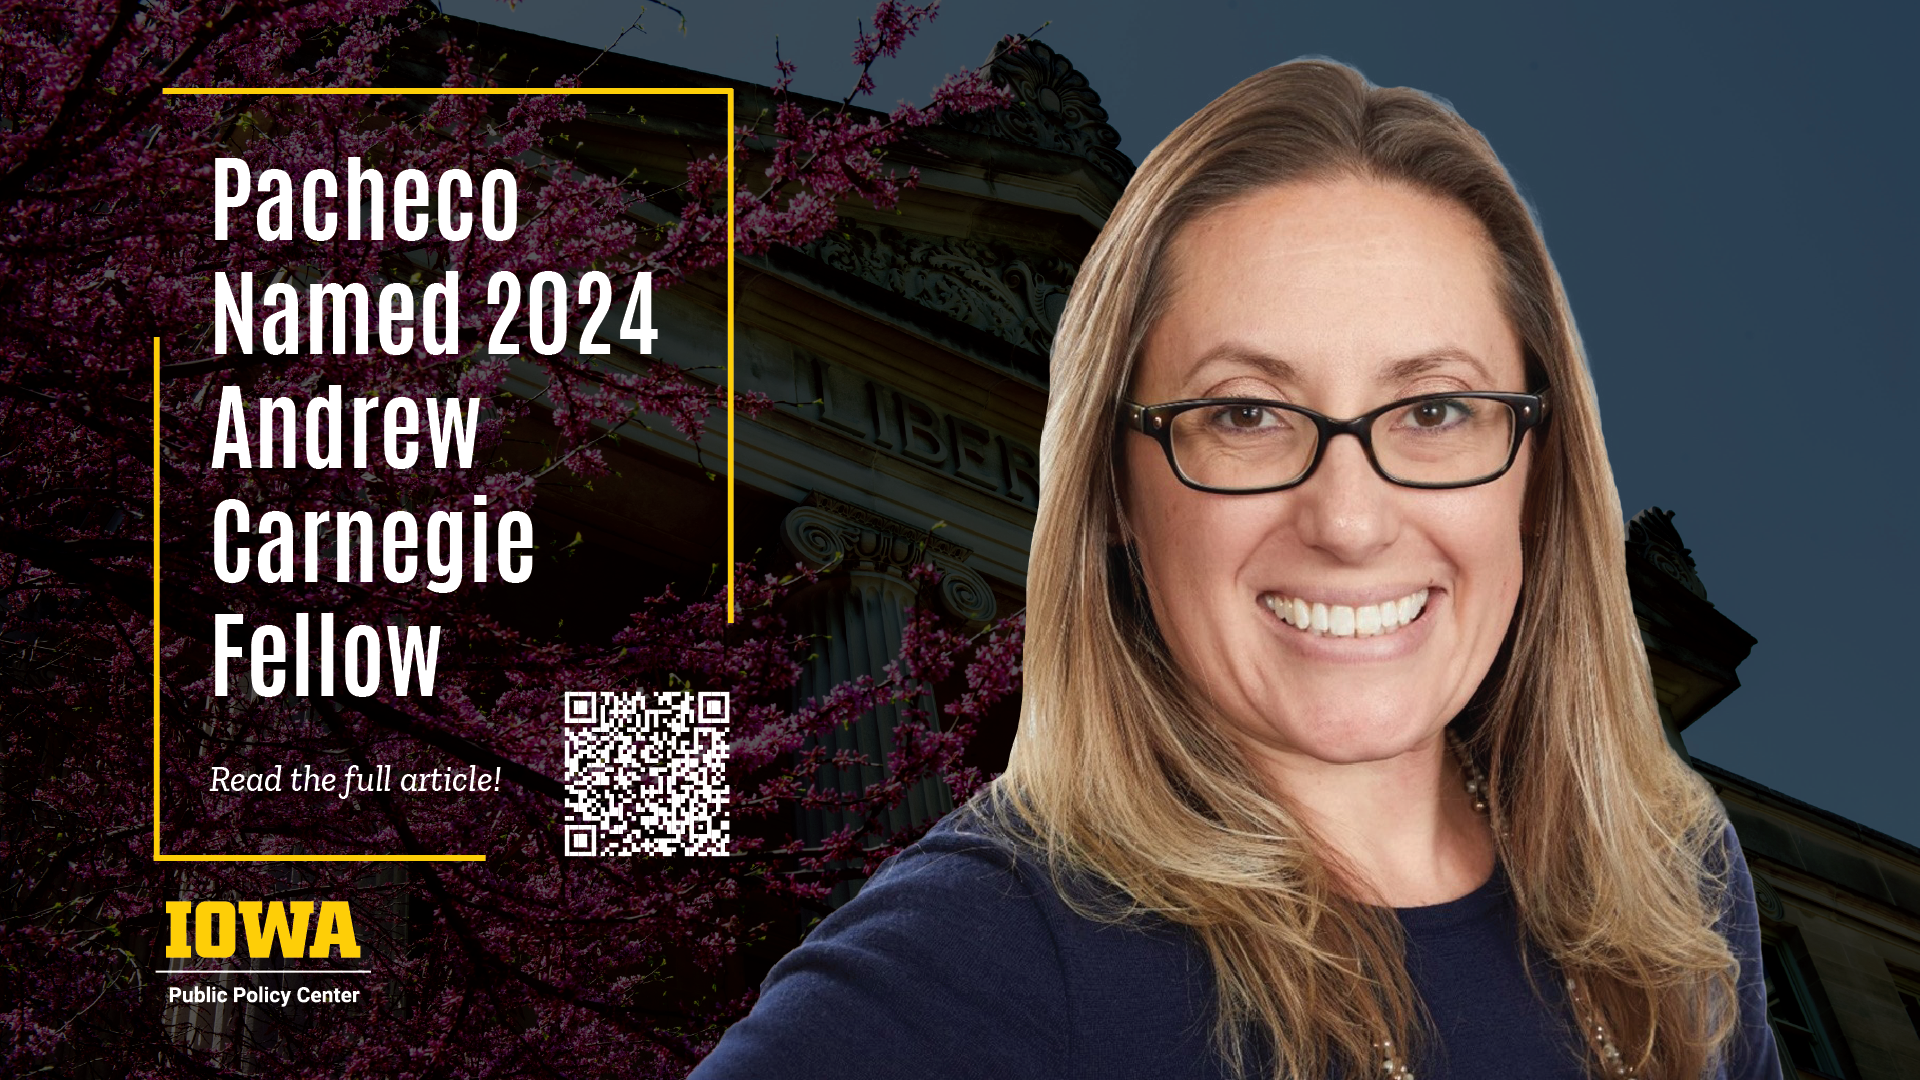 Julianna Pacheco's headshot sits next to block text that reads, "Pacheco Named 2024 Andrew Carnegie Fellow" with a QR code to read the full article. 